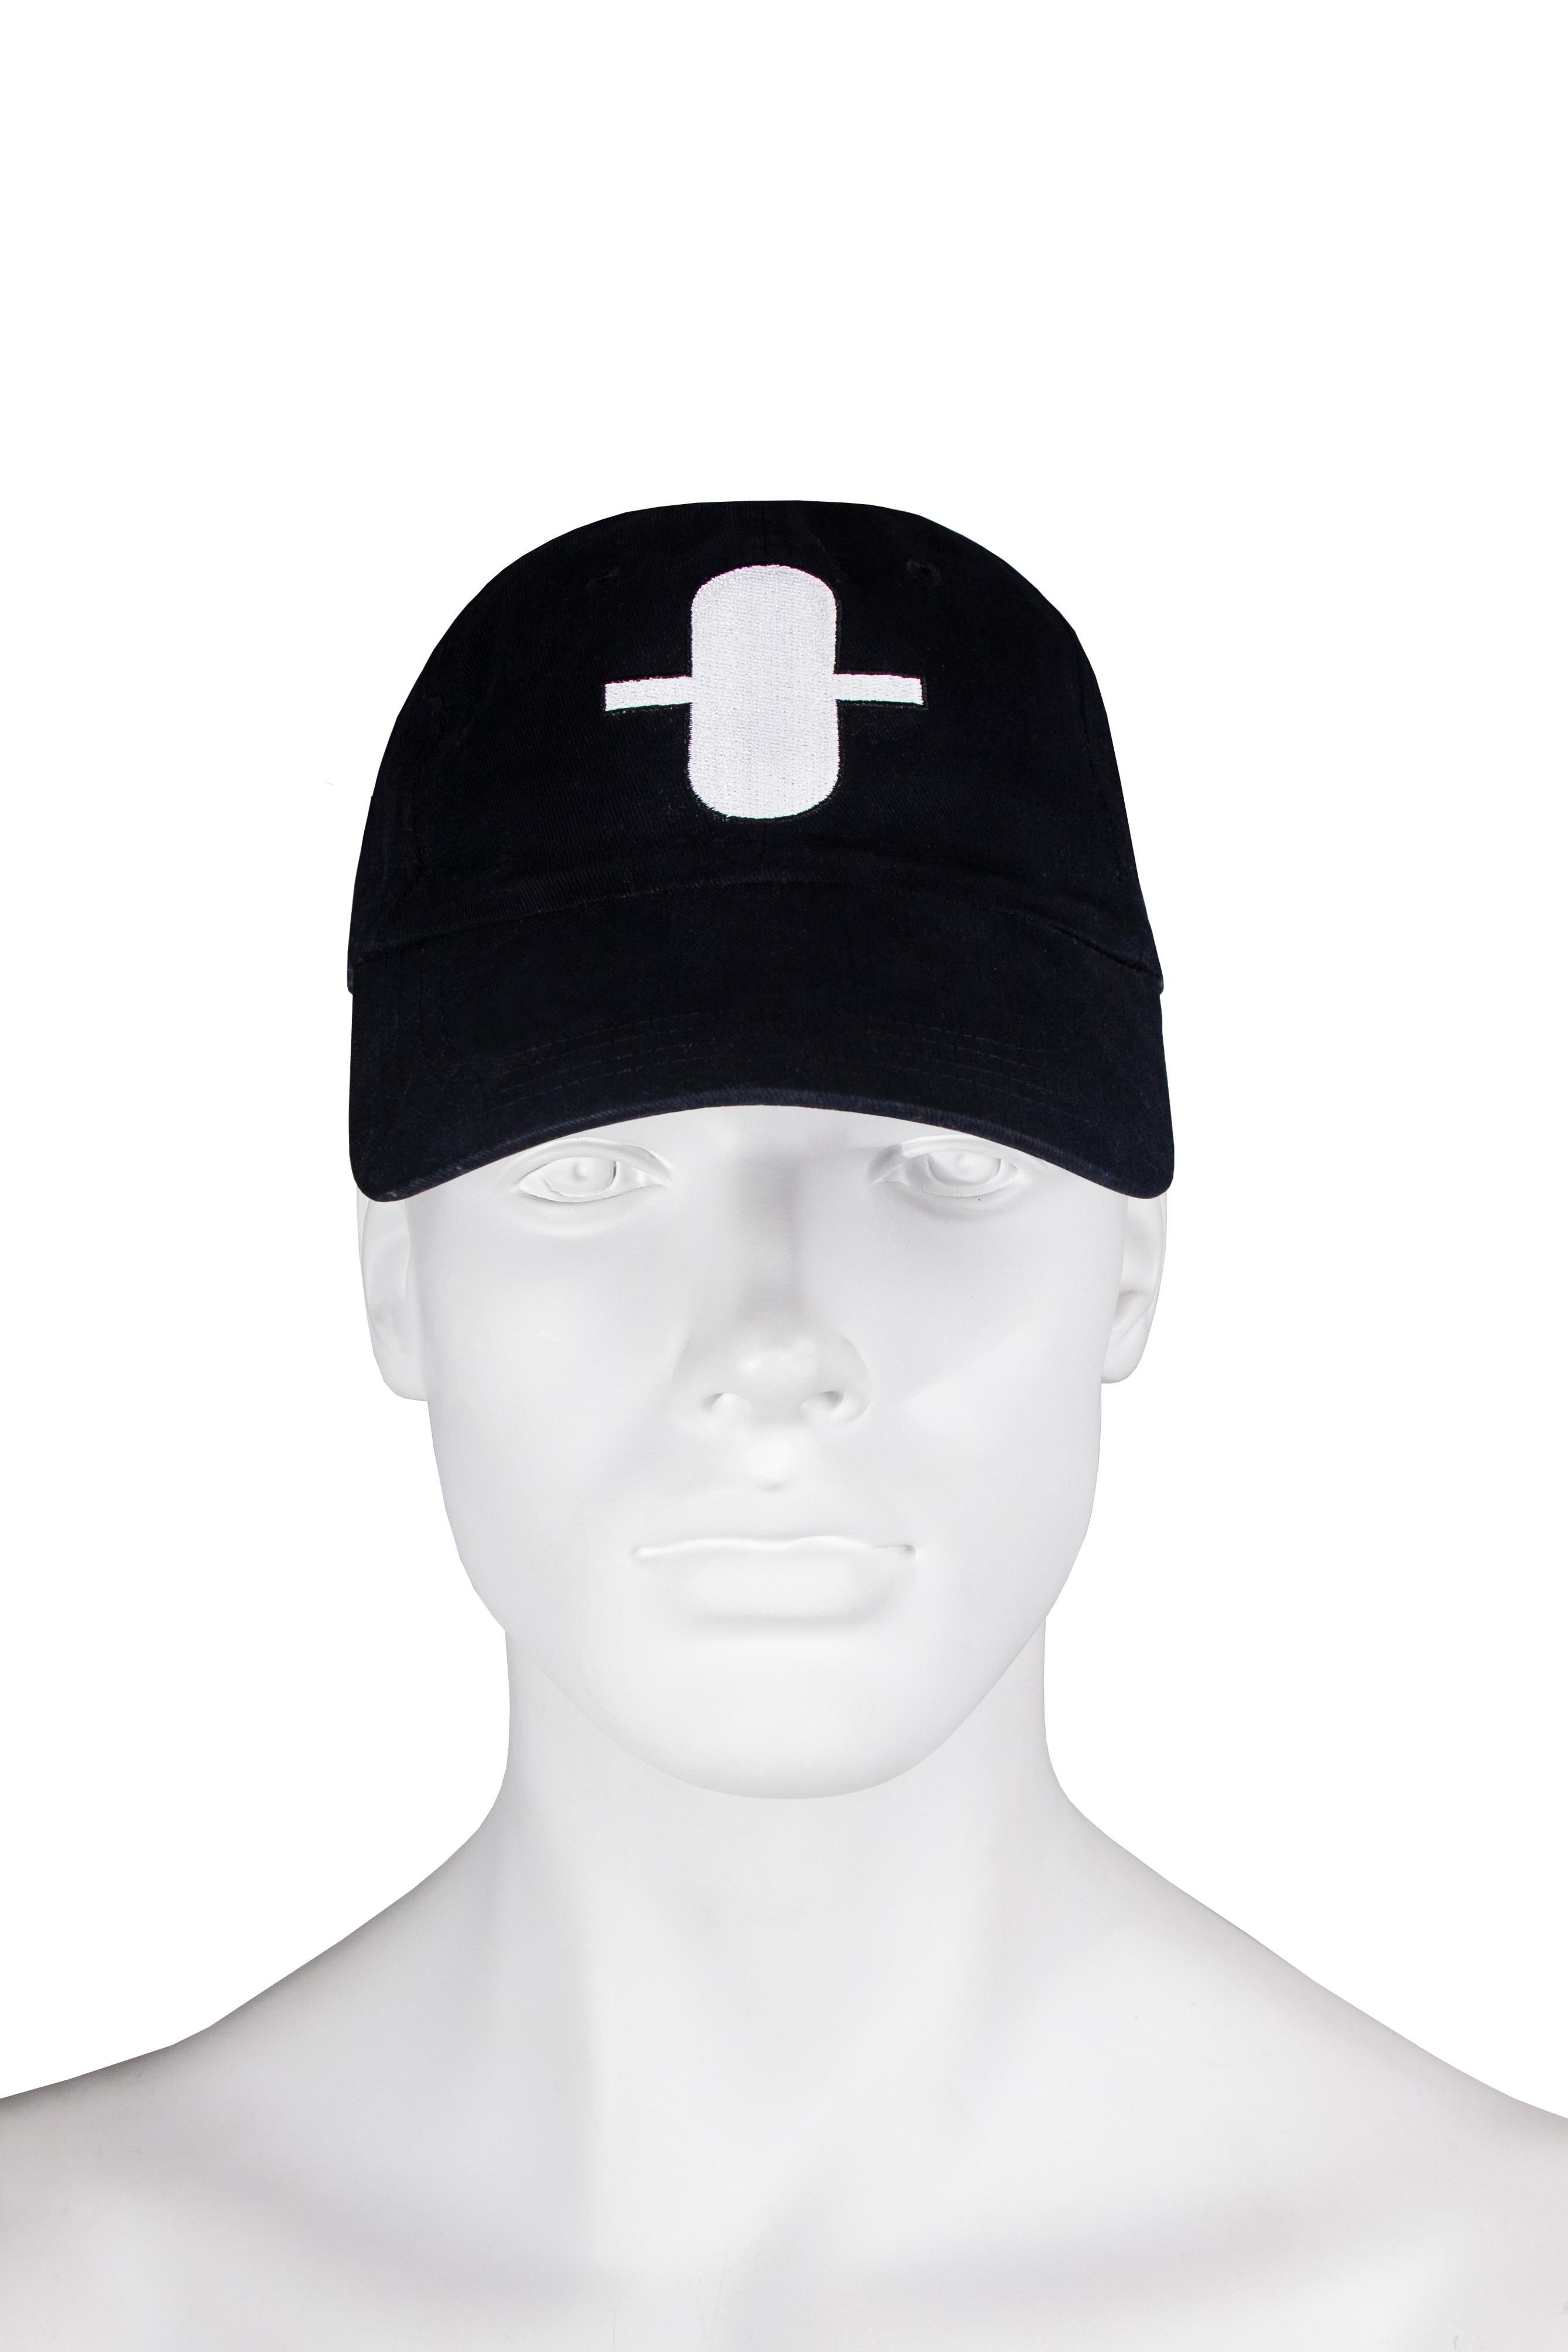 Matthew Barney 'Cremaster Cycle' cap, c. 2002 Guggenheim Museum In Excellent Condition For Sale In Melbourne, AU